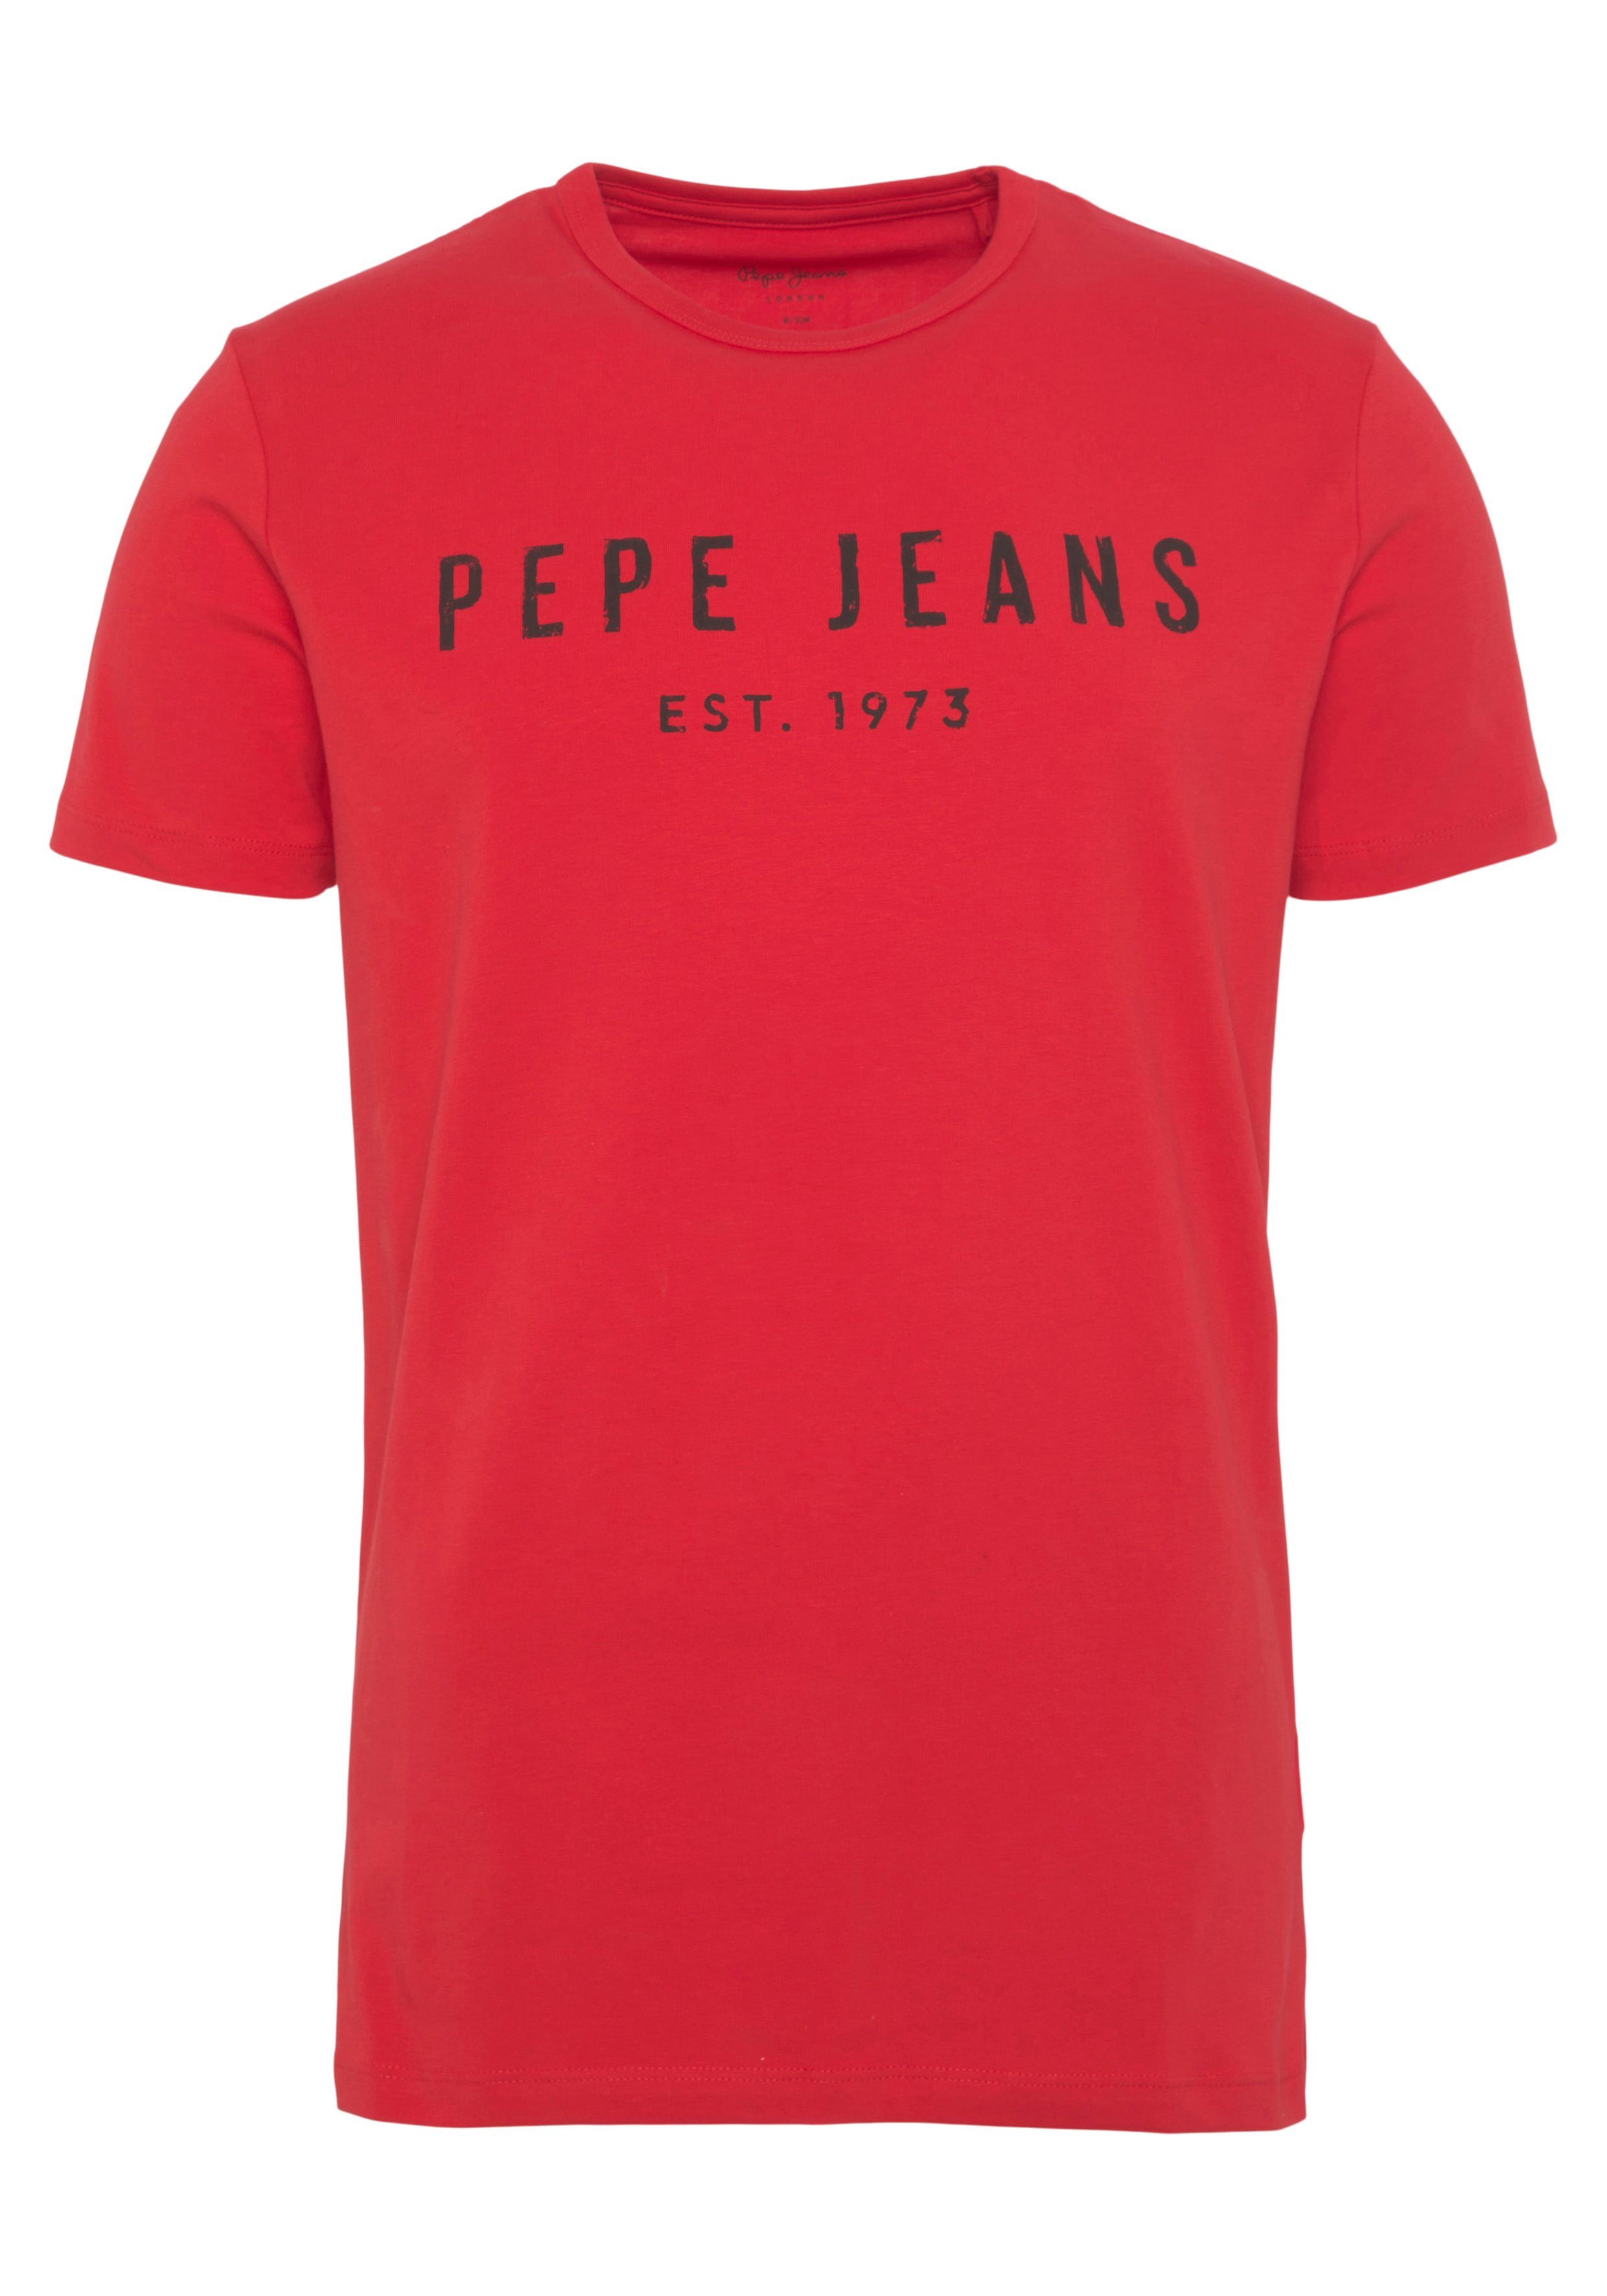 Jeans T-Shirt rot Pepe